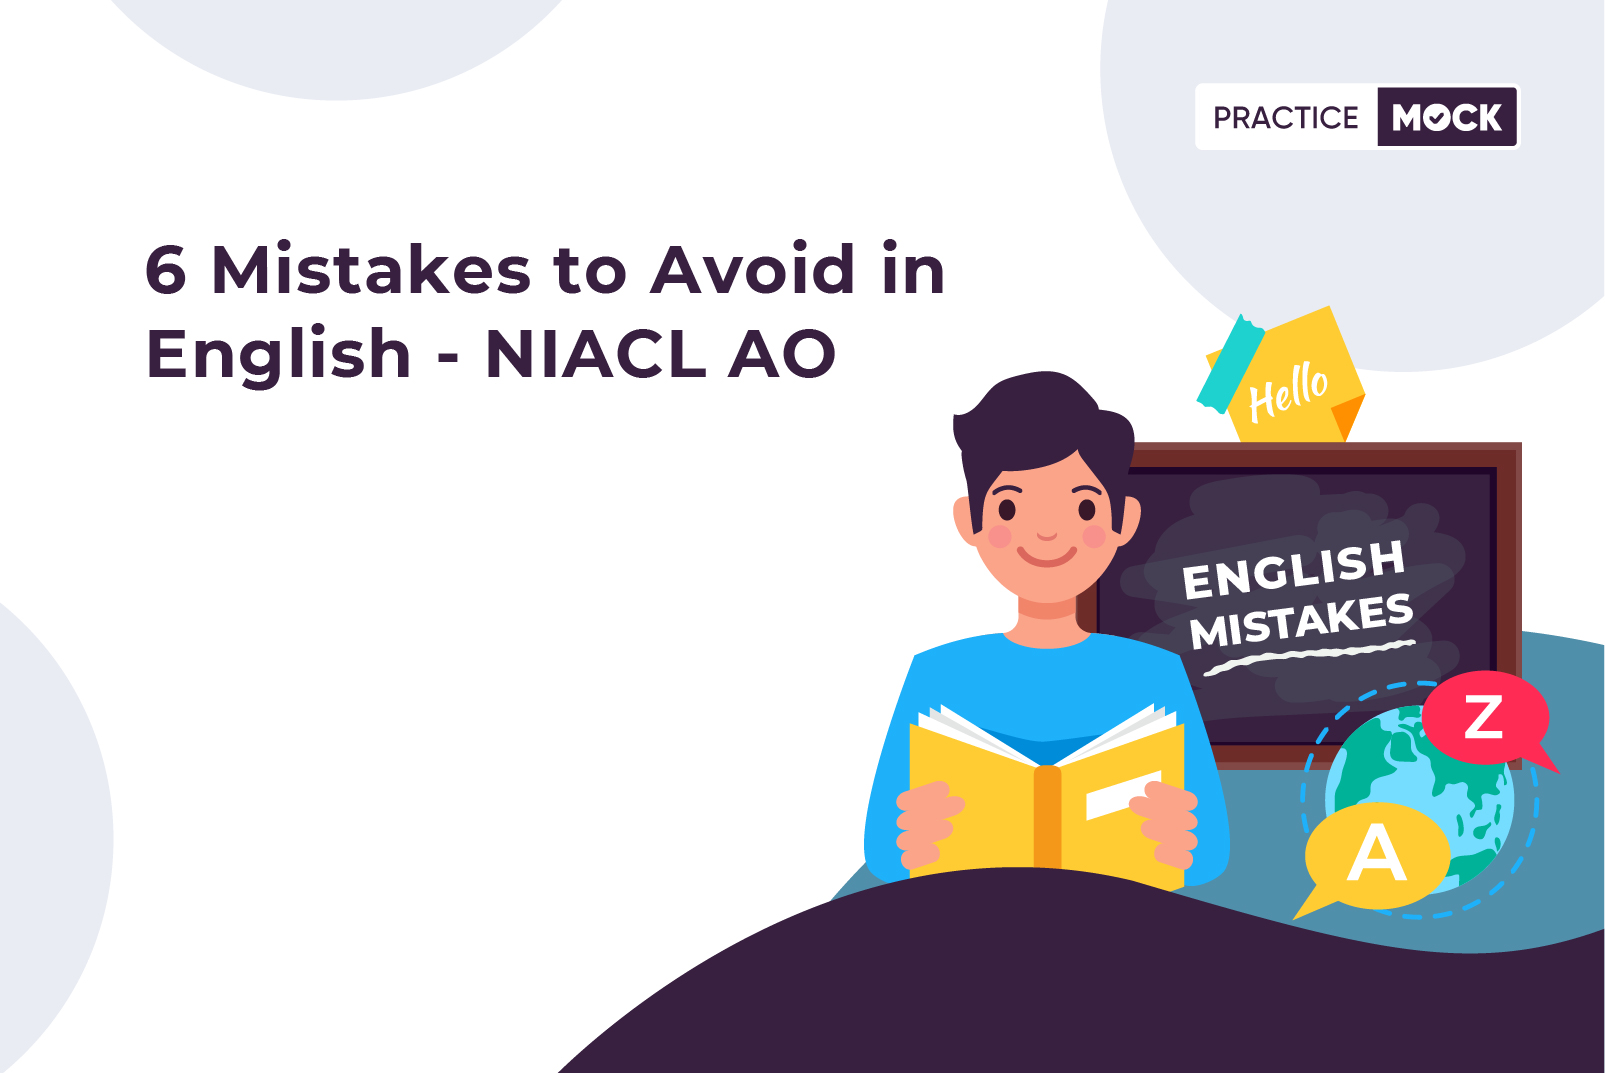 6 Mistakes to avoid in English - NIACL AO